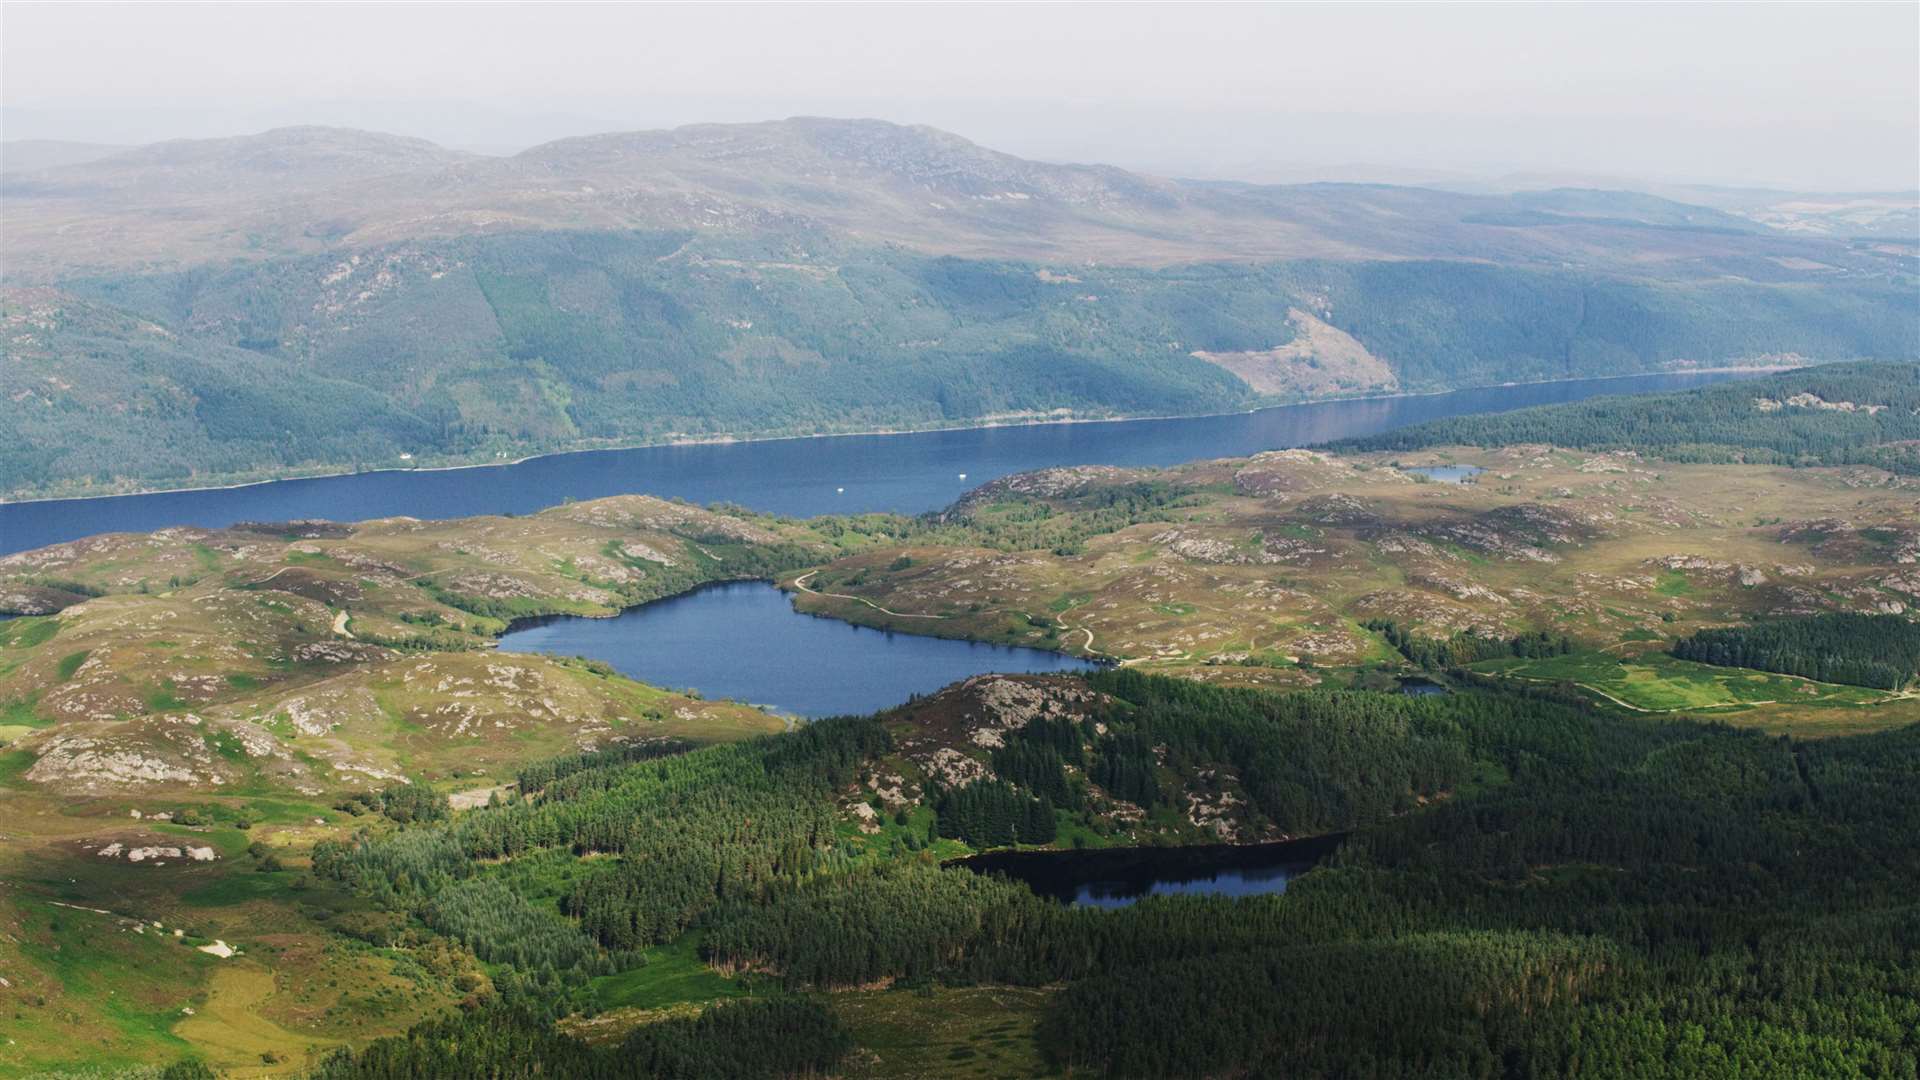 Plans were initially unveiled two years ago for a pumped storage hydro scheme at Loch Kemp.